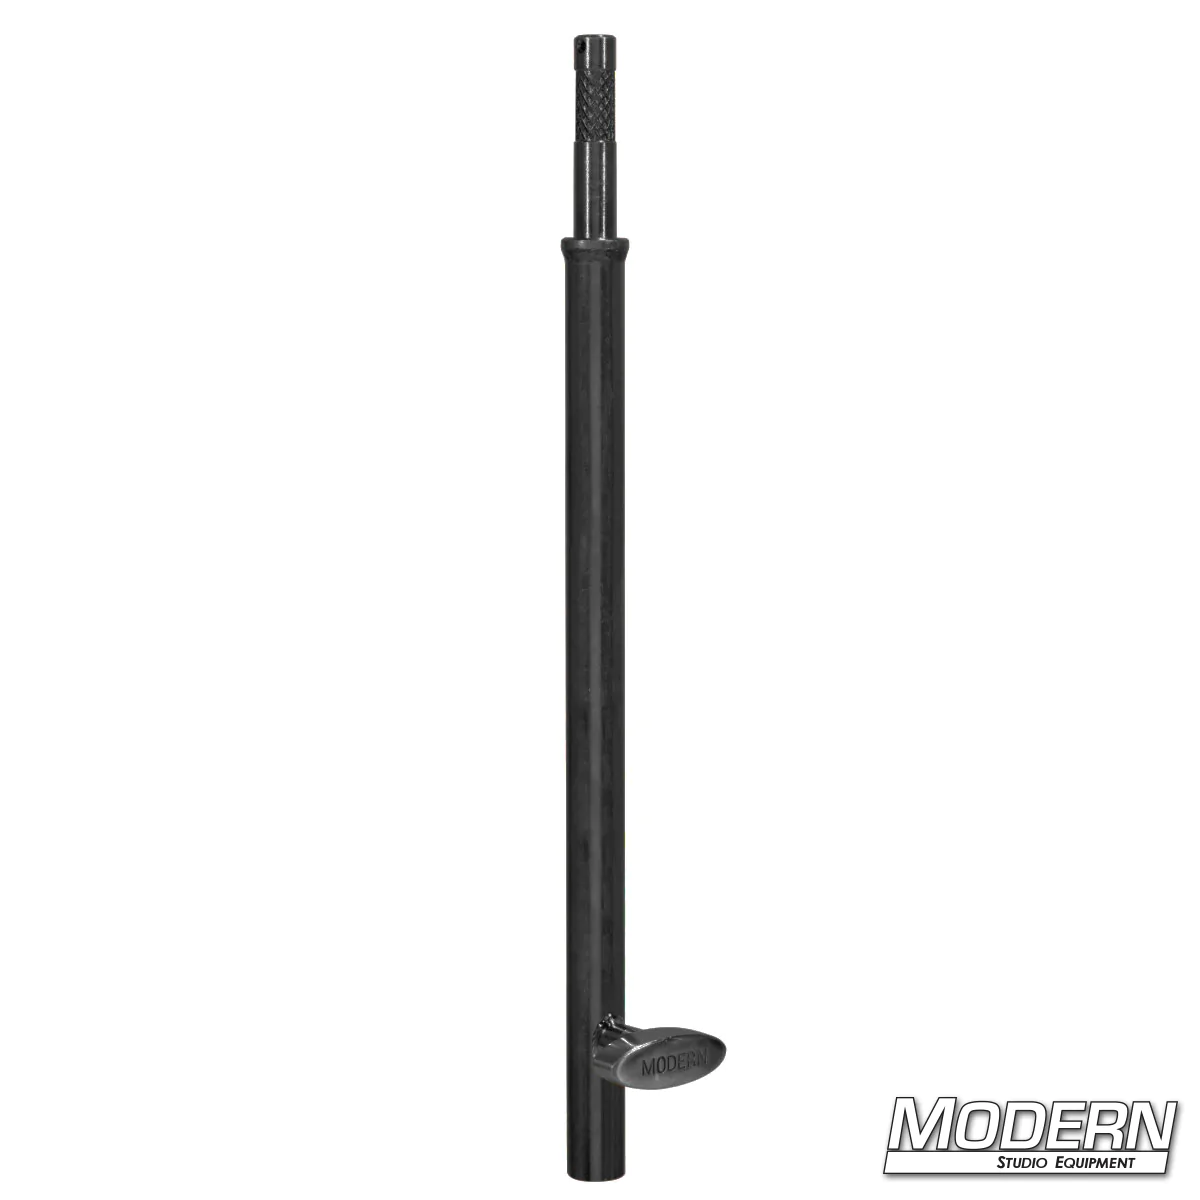 18" Baby Stand Extension - Black Zinc